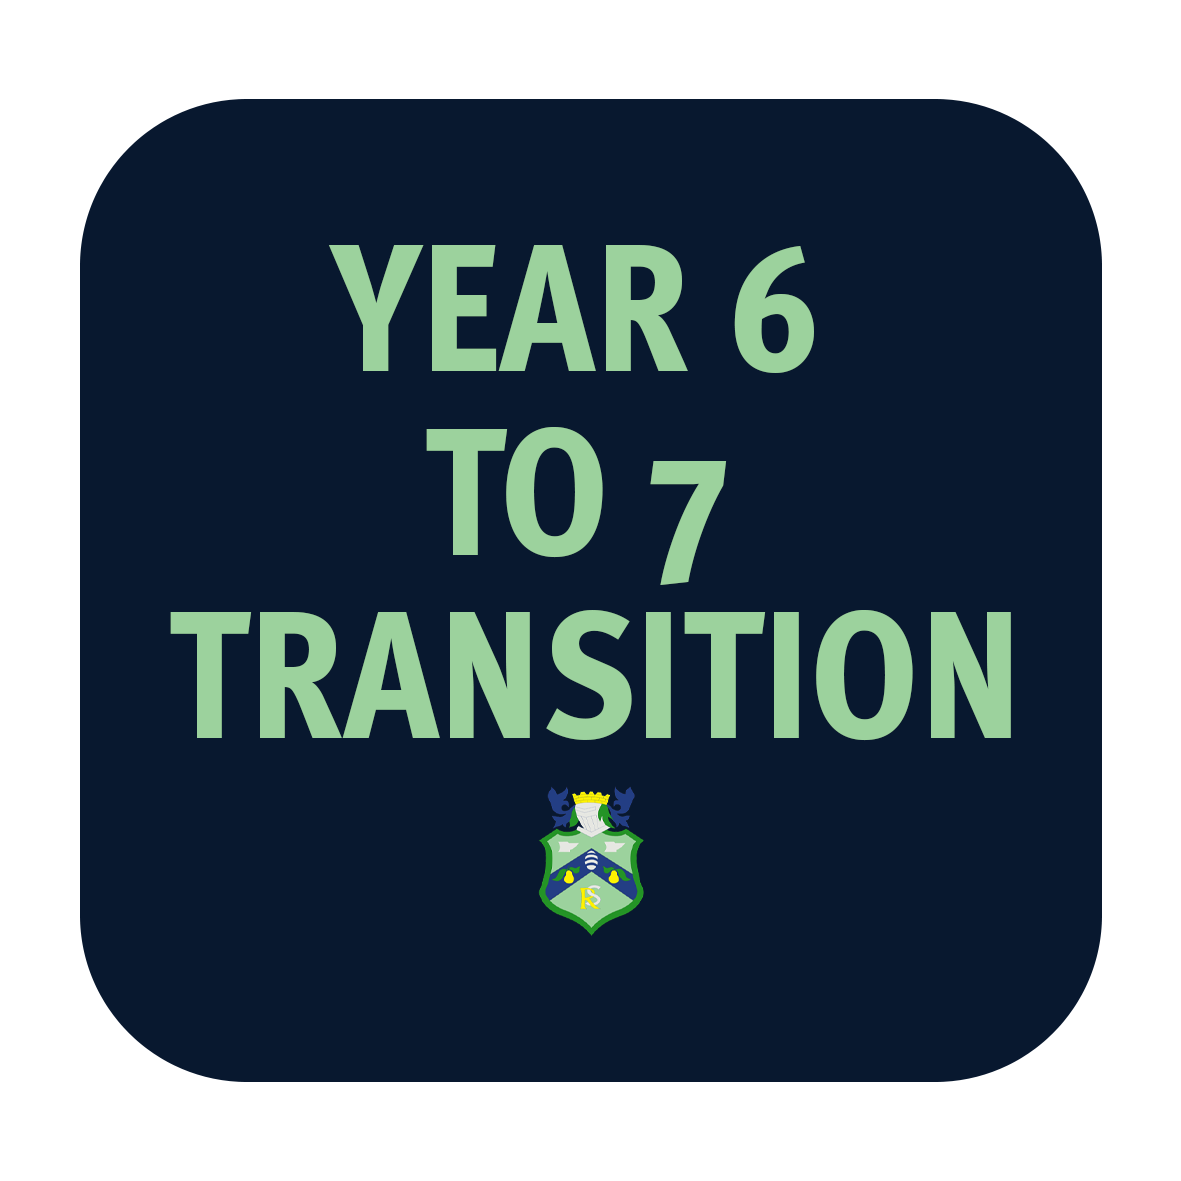 YEAR 6 TO 7 TRANSITION